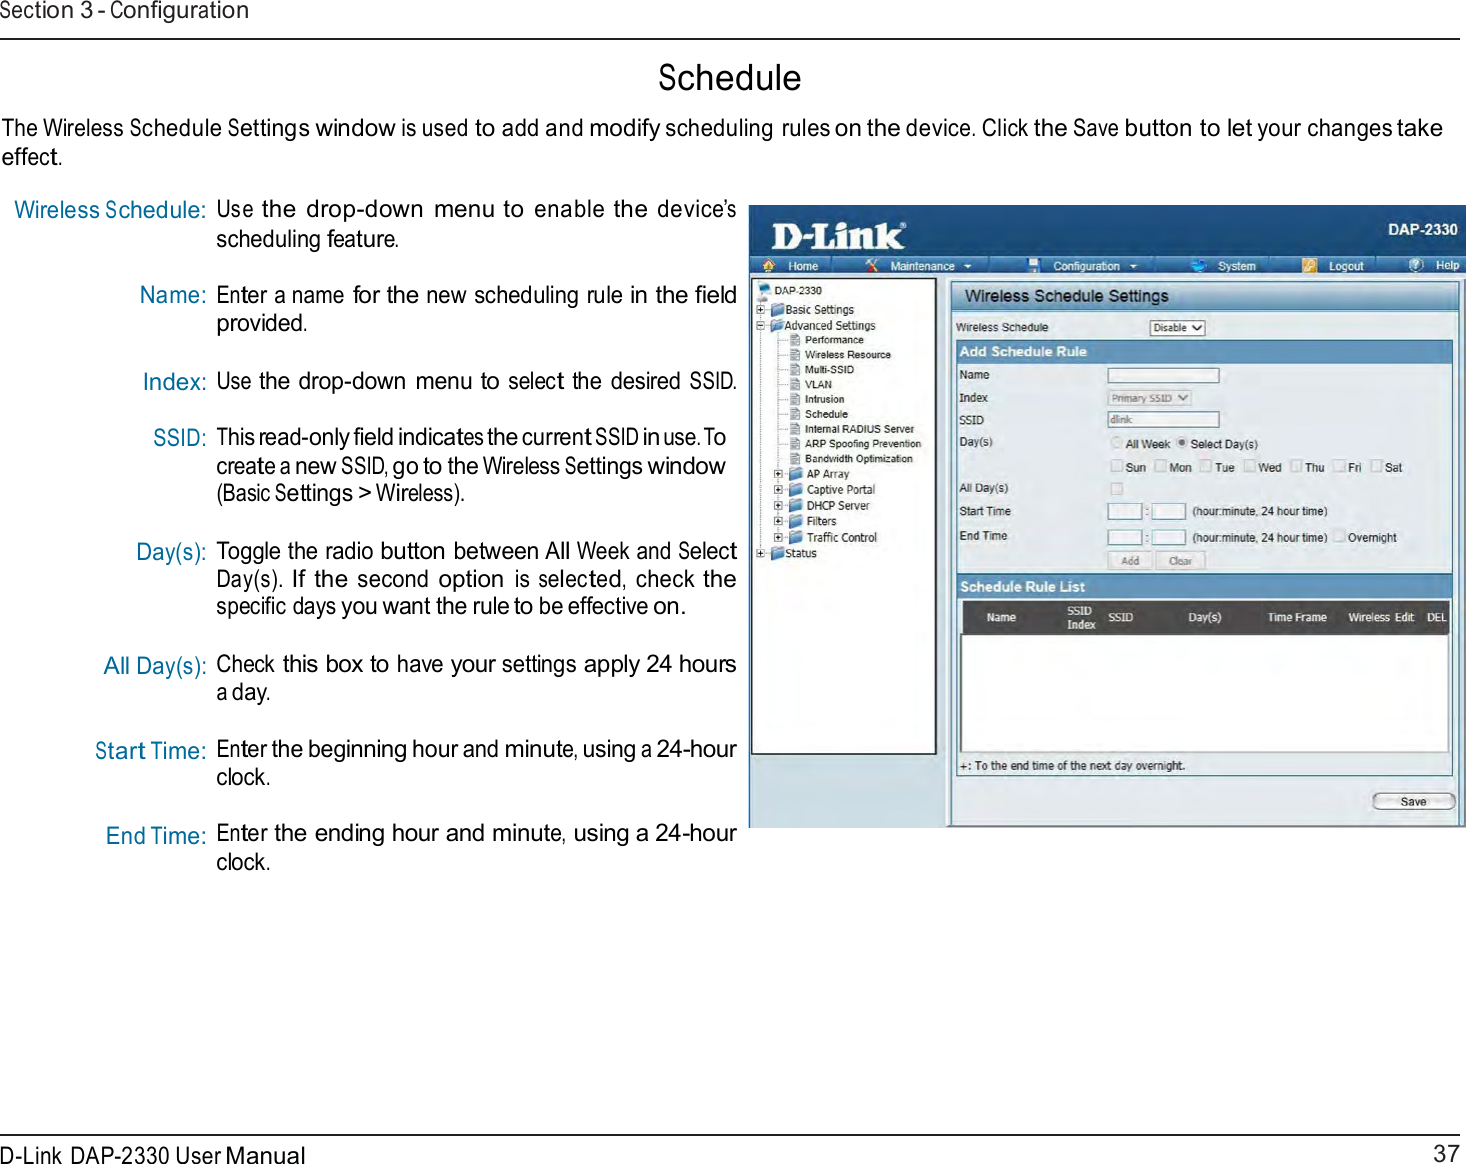 37 D-Link DAP-2330 User ManualSection 3 - Configuration      Schedule  The Wireless Schedule Settings window is used to add and modify scheduling rules on the device. Click the Save button to let your changes take effect.  Wireless Schedule: Name: Index: SSID:    Day(s):     All Day(s): Start Time: End Time: Use the drop-down menu to enable the device’s scheduling feature.  Enter a name for the new scheduling rule in the field provided. Use the drop-down menu to select the desired SSID. This read-only field indicates the current SSID in use. To create a new SSID, go to the Wireless Settings window (Basic Settings &gt; Wireless).  Toggle the radio button between All Week and Select Day(s). If the second option is selected, check the specific days you want the rule to be effective on.  Check this box to have your settings apply 24 hours a day.  Enter the beginning hour and minute, using a 24-hour clock.  Enter the ending hour and minute, using a 24-hour clock. 